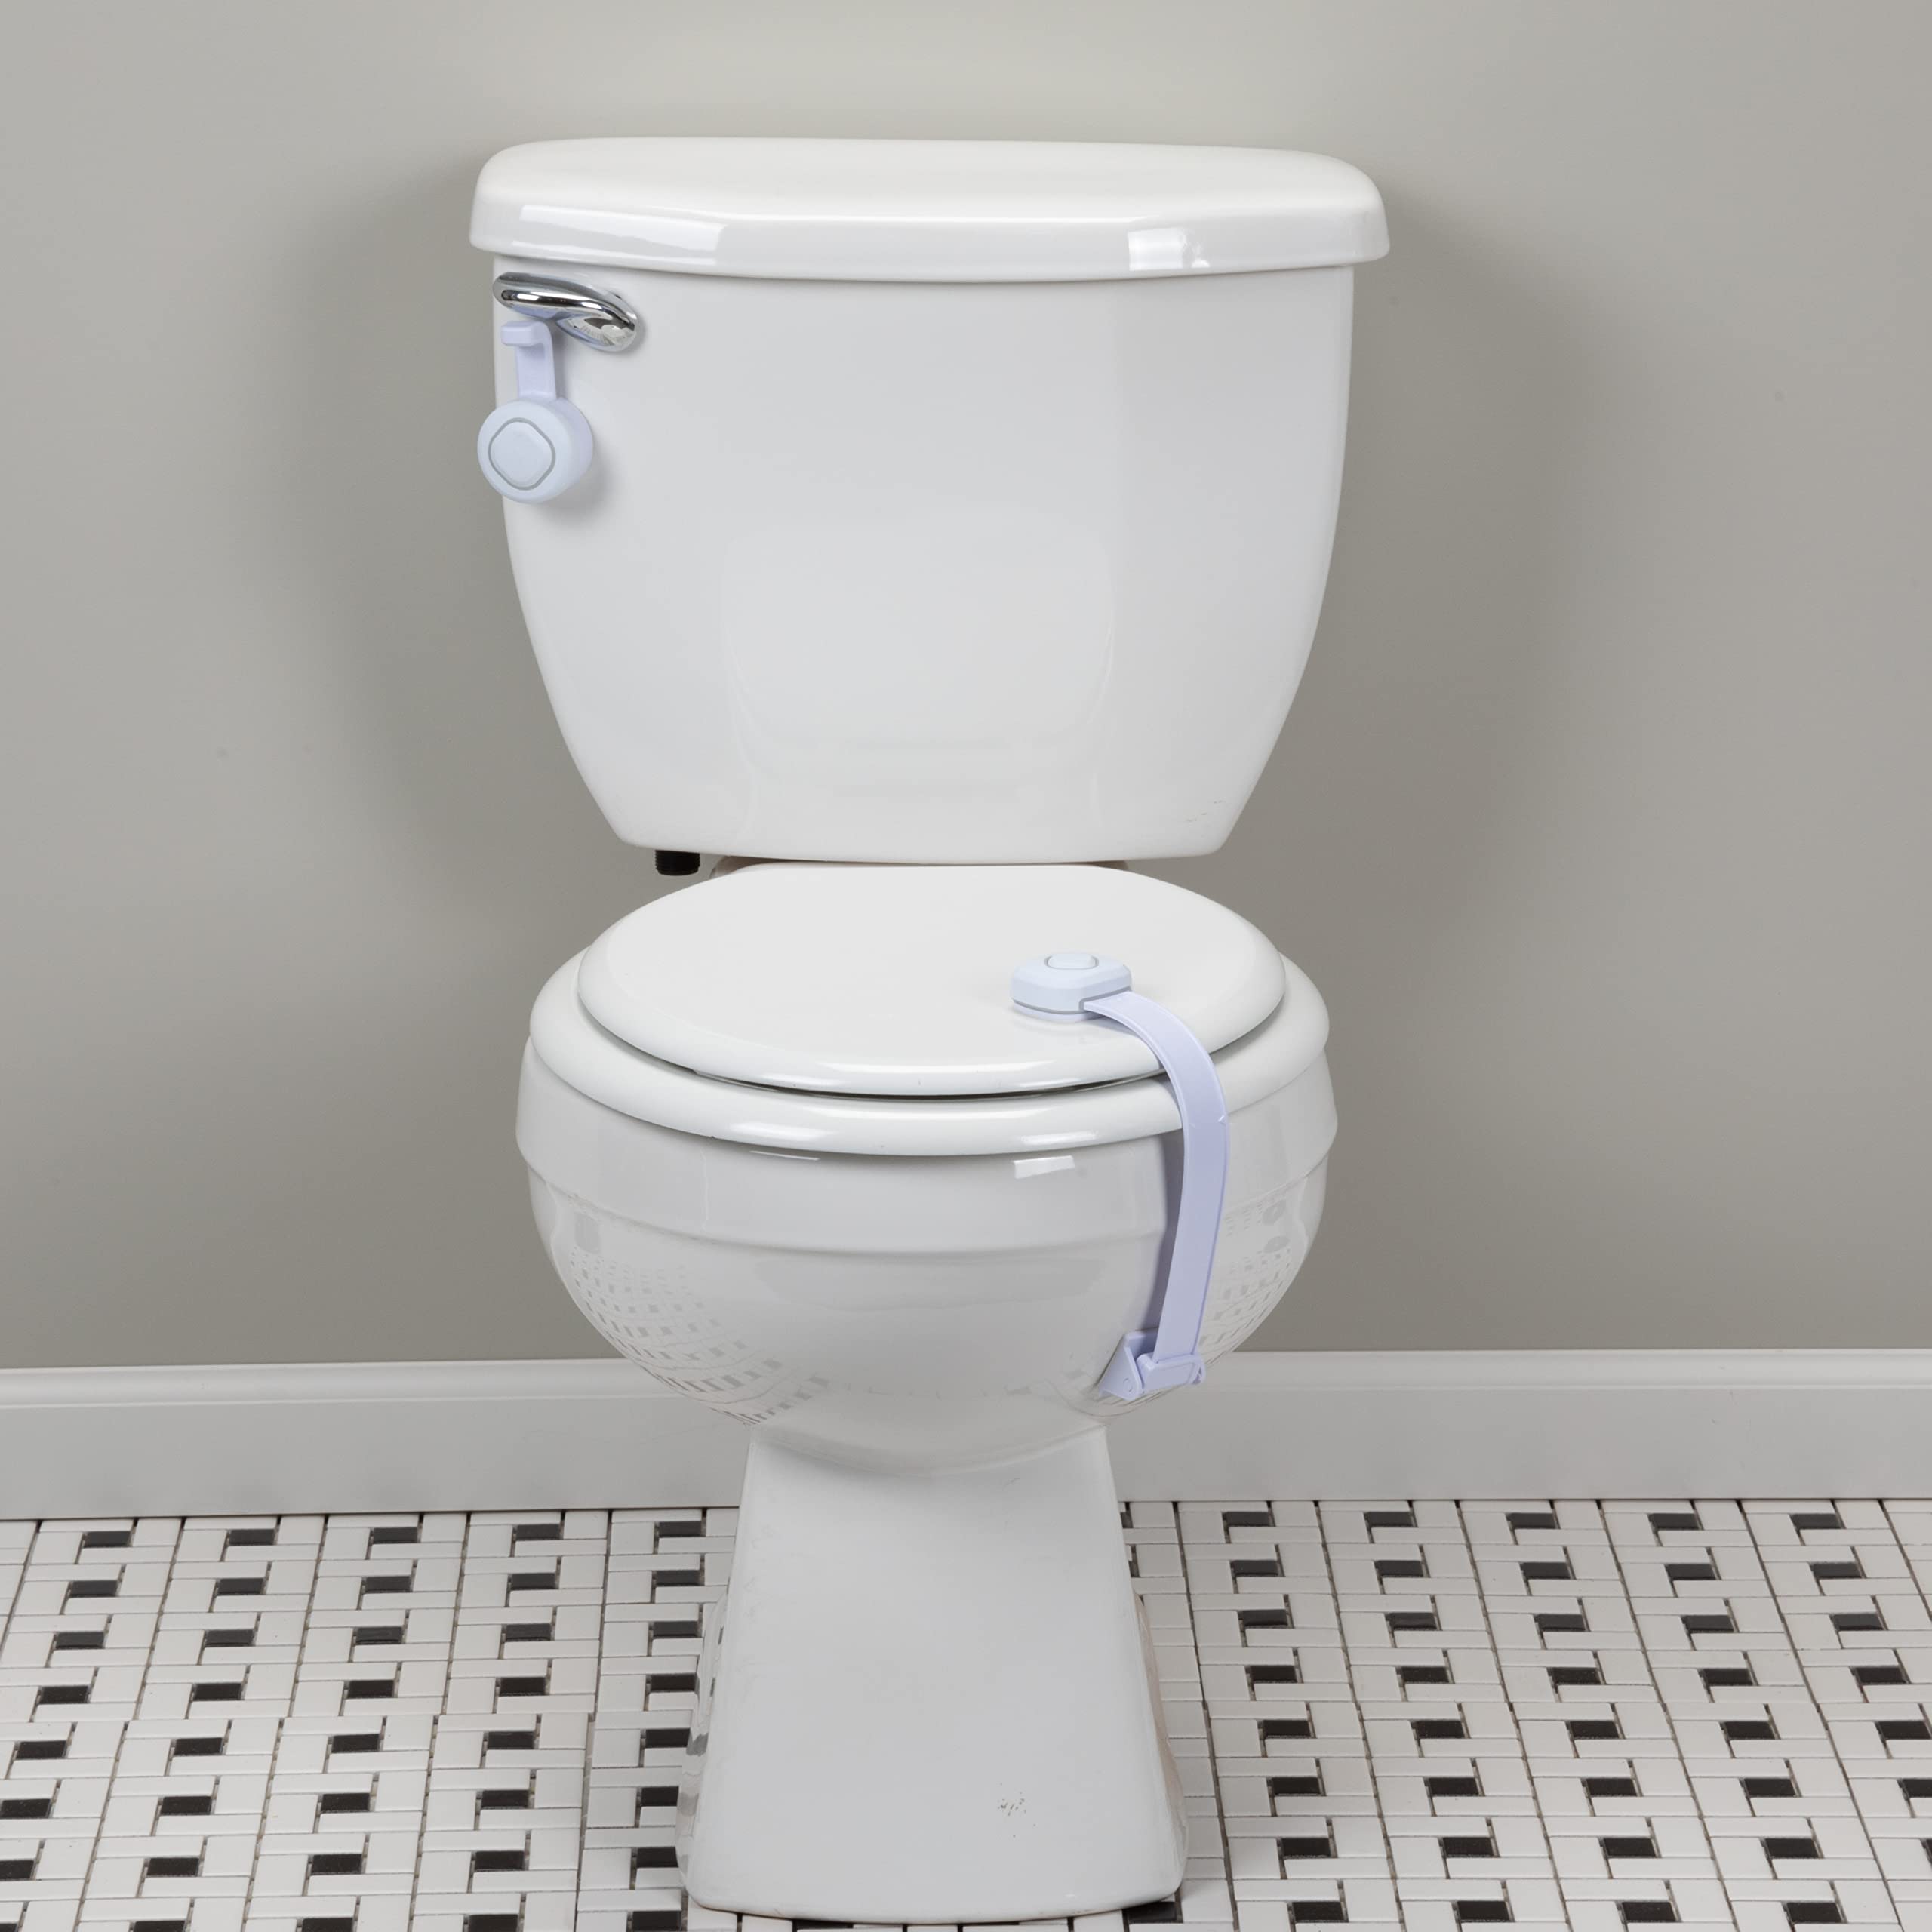 Safety 1st Room Solutions: No-Tools Baby Proof Bathroom Safety Kit - Includes Locks for Toilet